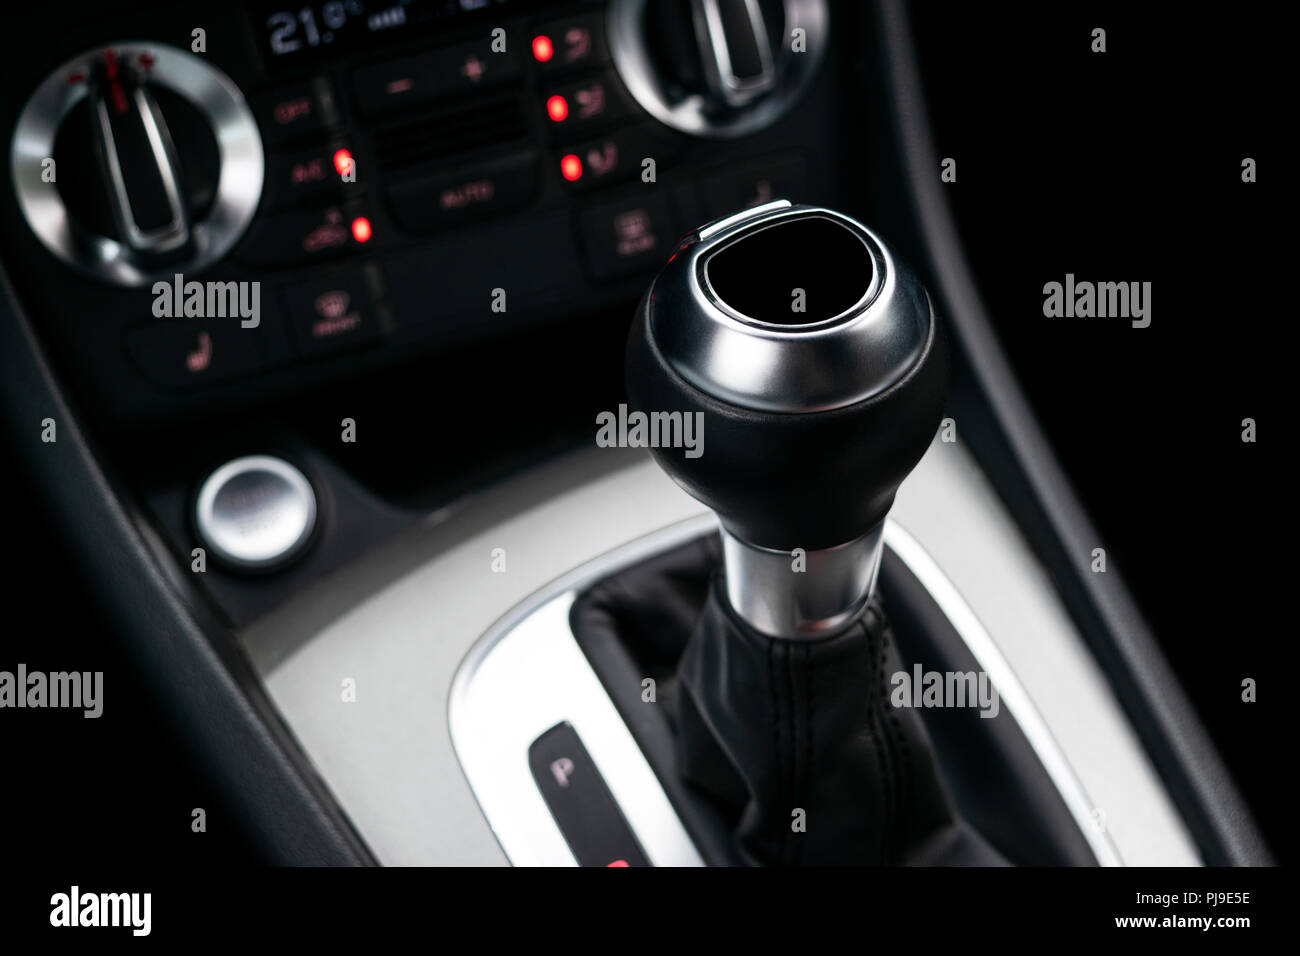 Automatic Gear Stick Of A Modern Car Modern Car Interior Details Close Up View Car Detailing Automatic Transmission Lever Shift Black Leather In Stock Photo Alamy